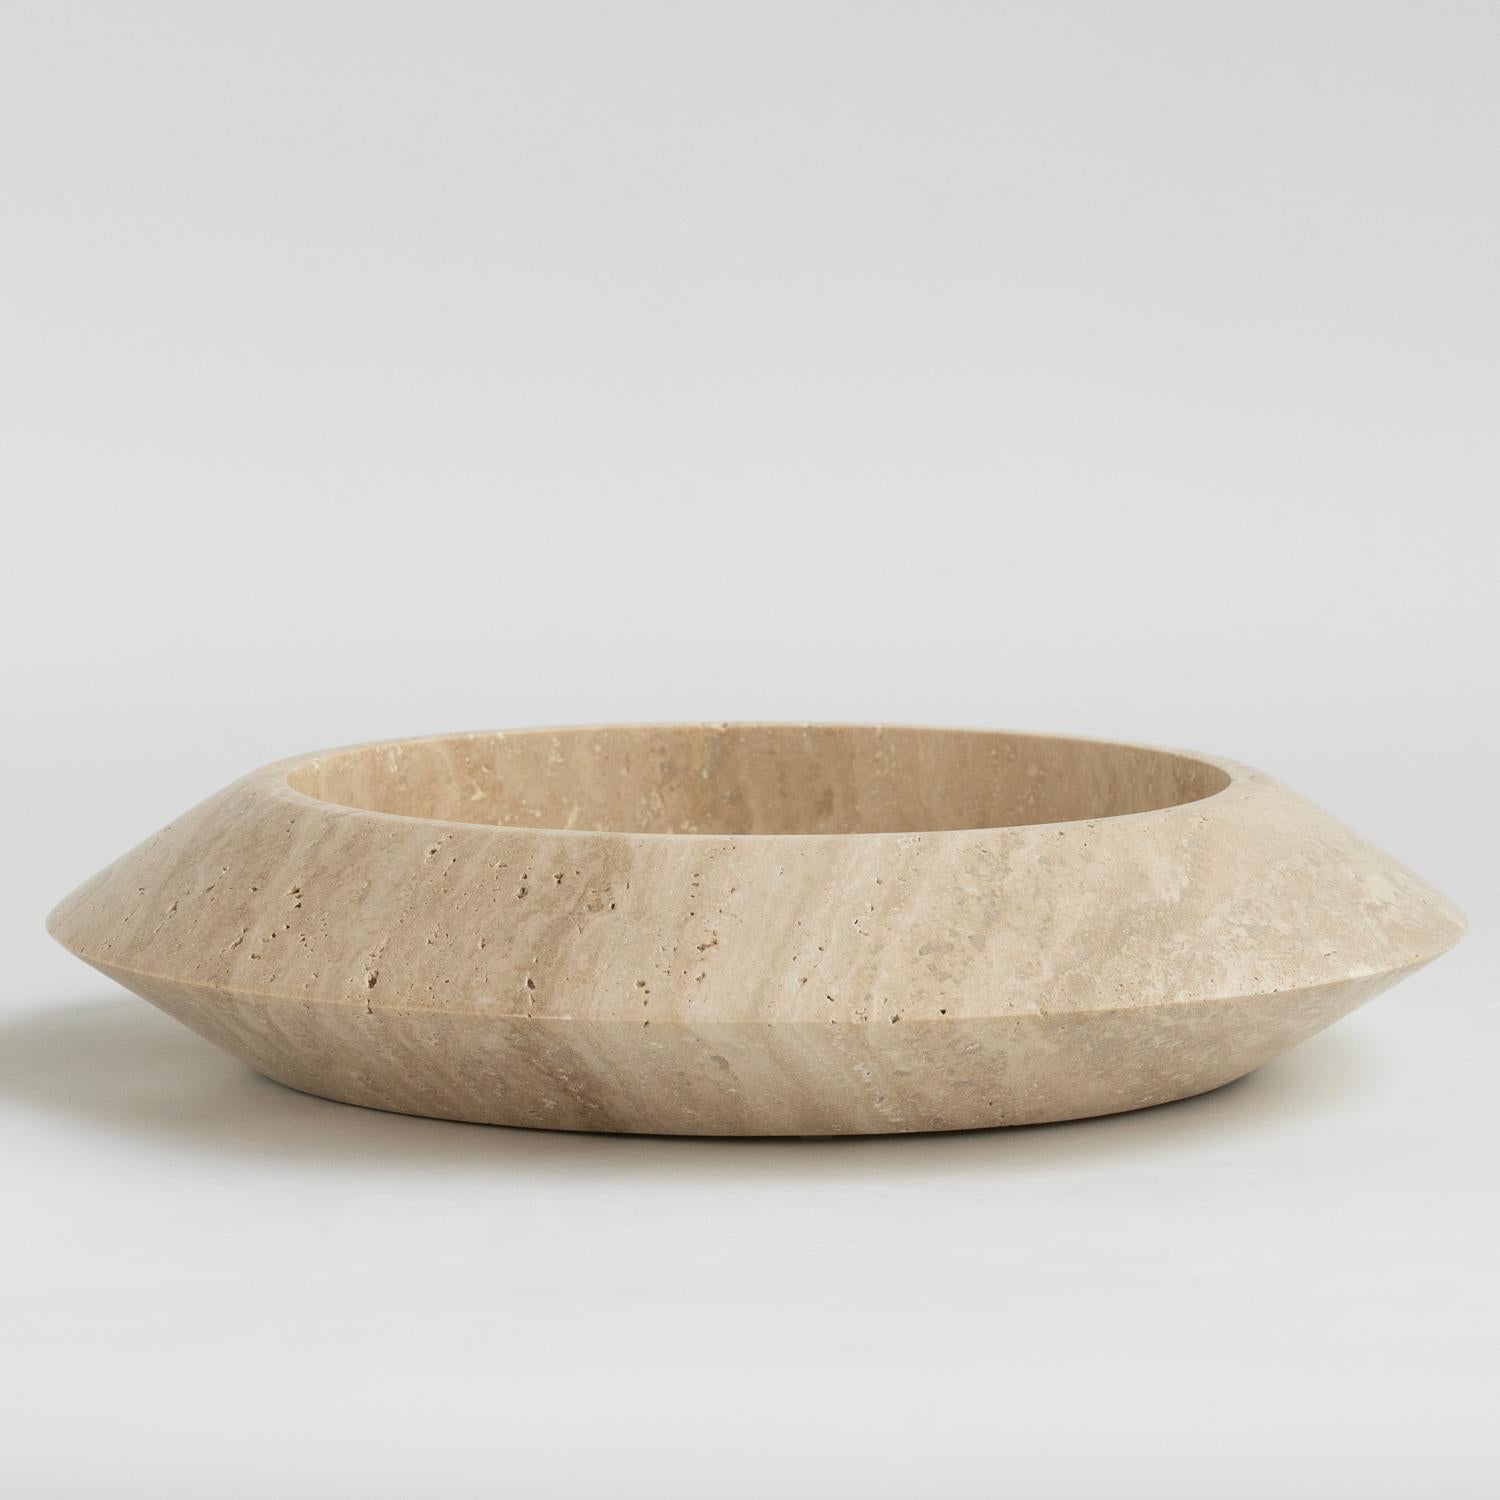 Stunning, aesthetic, timeless are words that can be used to describe this elegant and modern travertine Eclipse bowl from Kiwano. Expertly crafted and finished by hand, our travertine bowls are a study in sculptural simplicity. Natural variations in